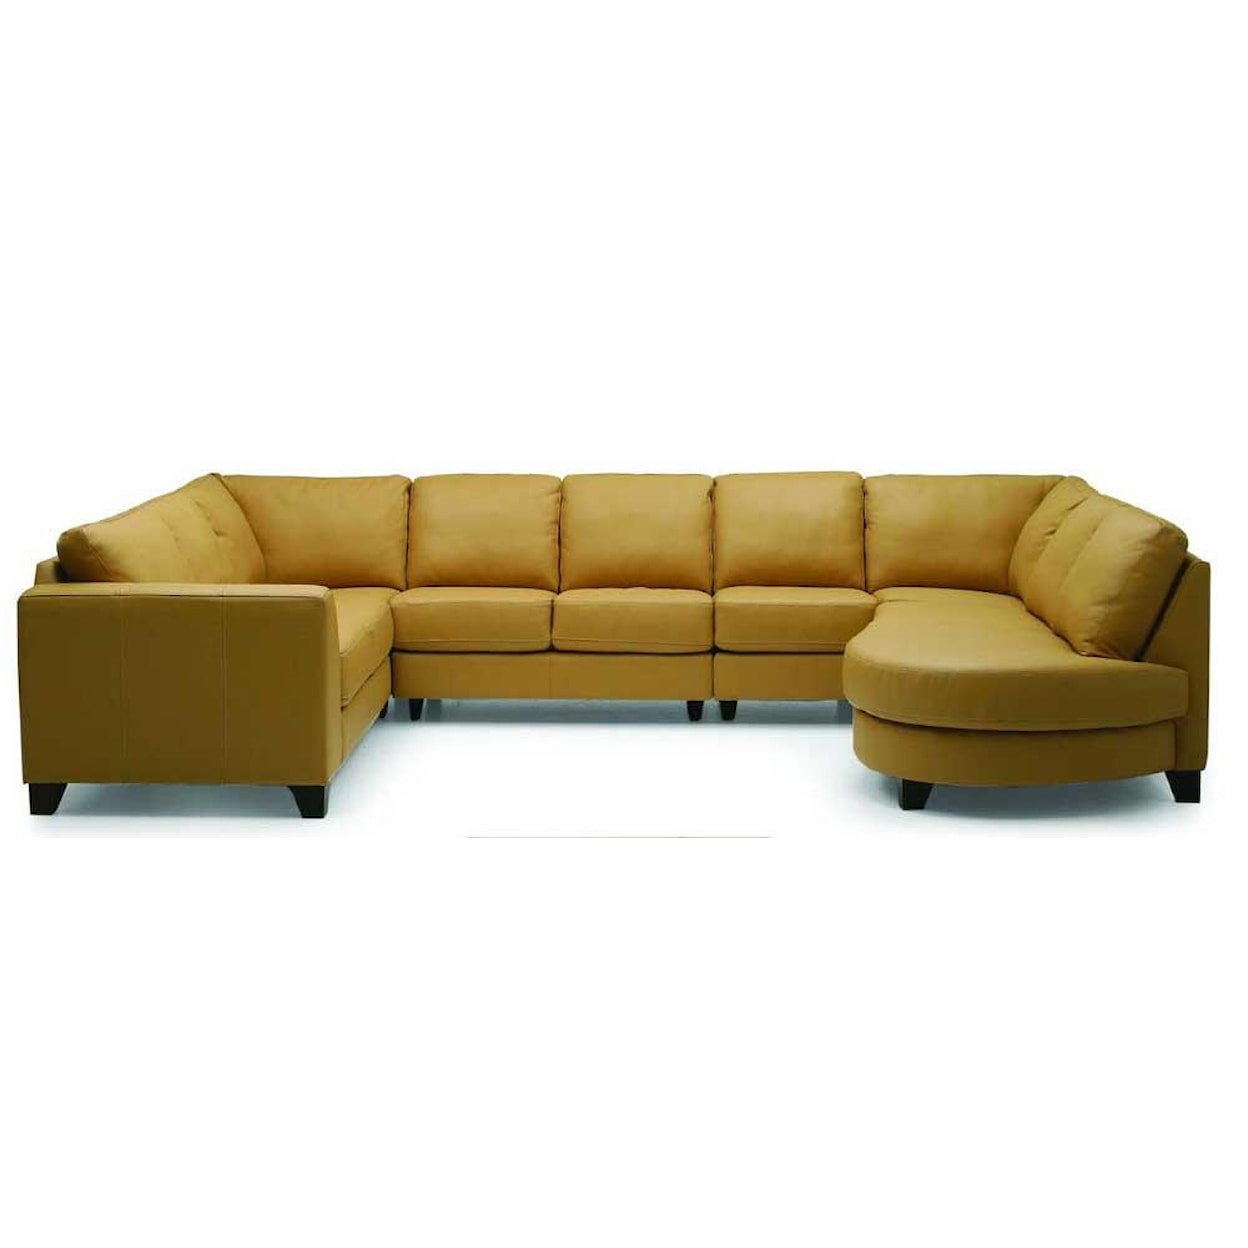 Palliser Juno Elements77494 Chaise and Sofa Sectional